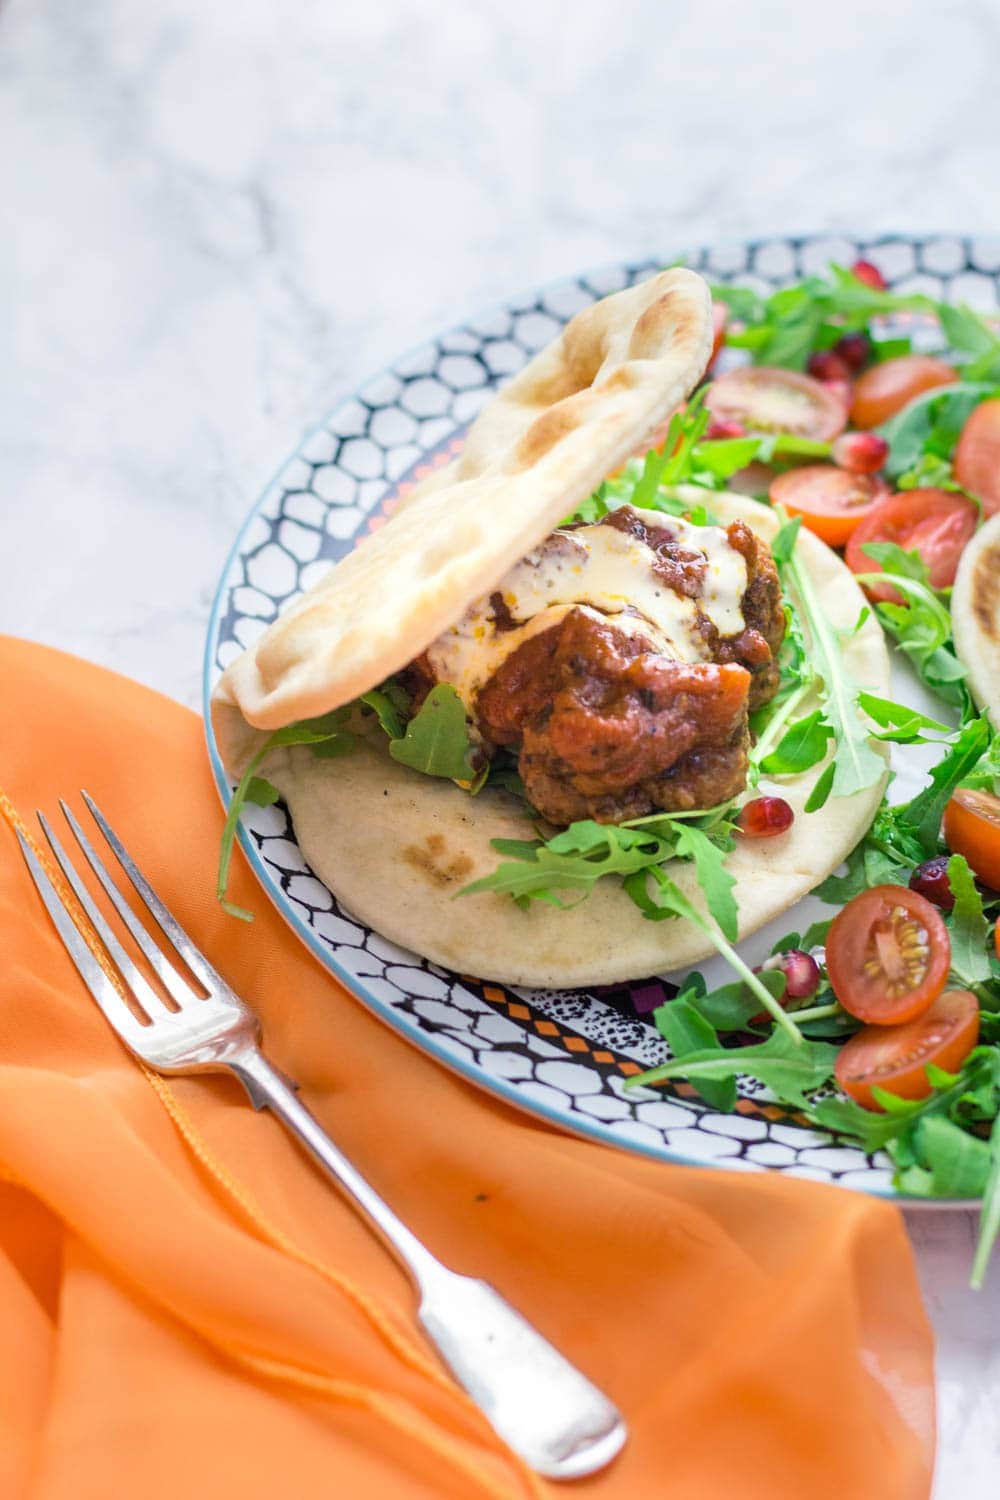 These Moroccan meatball flatbreads are surprisingly quick to make. The meatballs are simmered in a harissa tomato sauce and served with a drizzle of aioli.